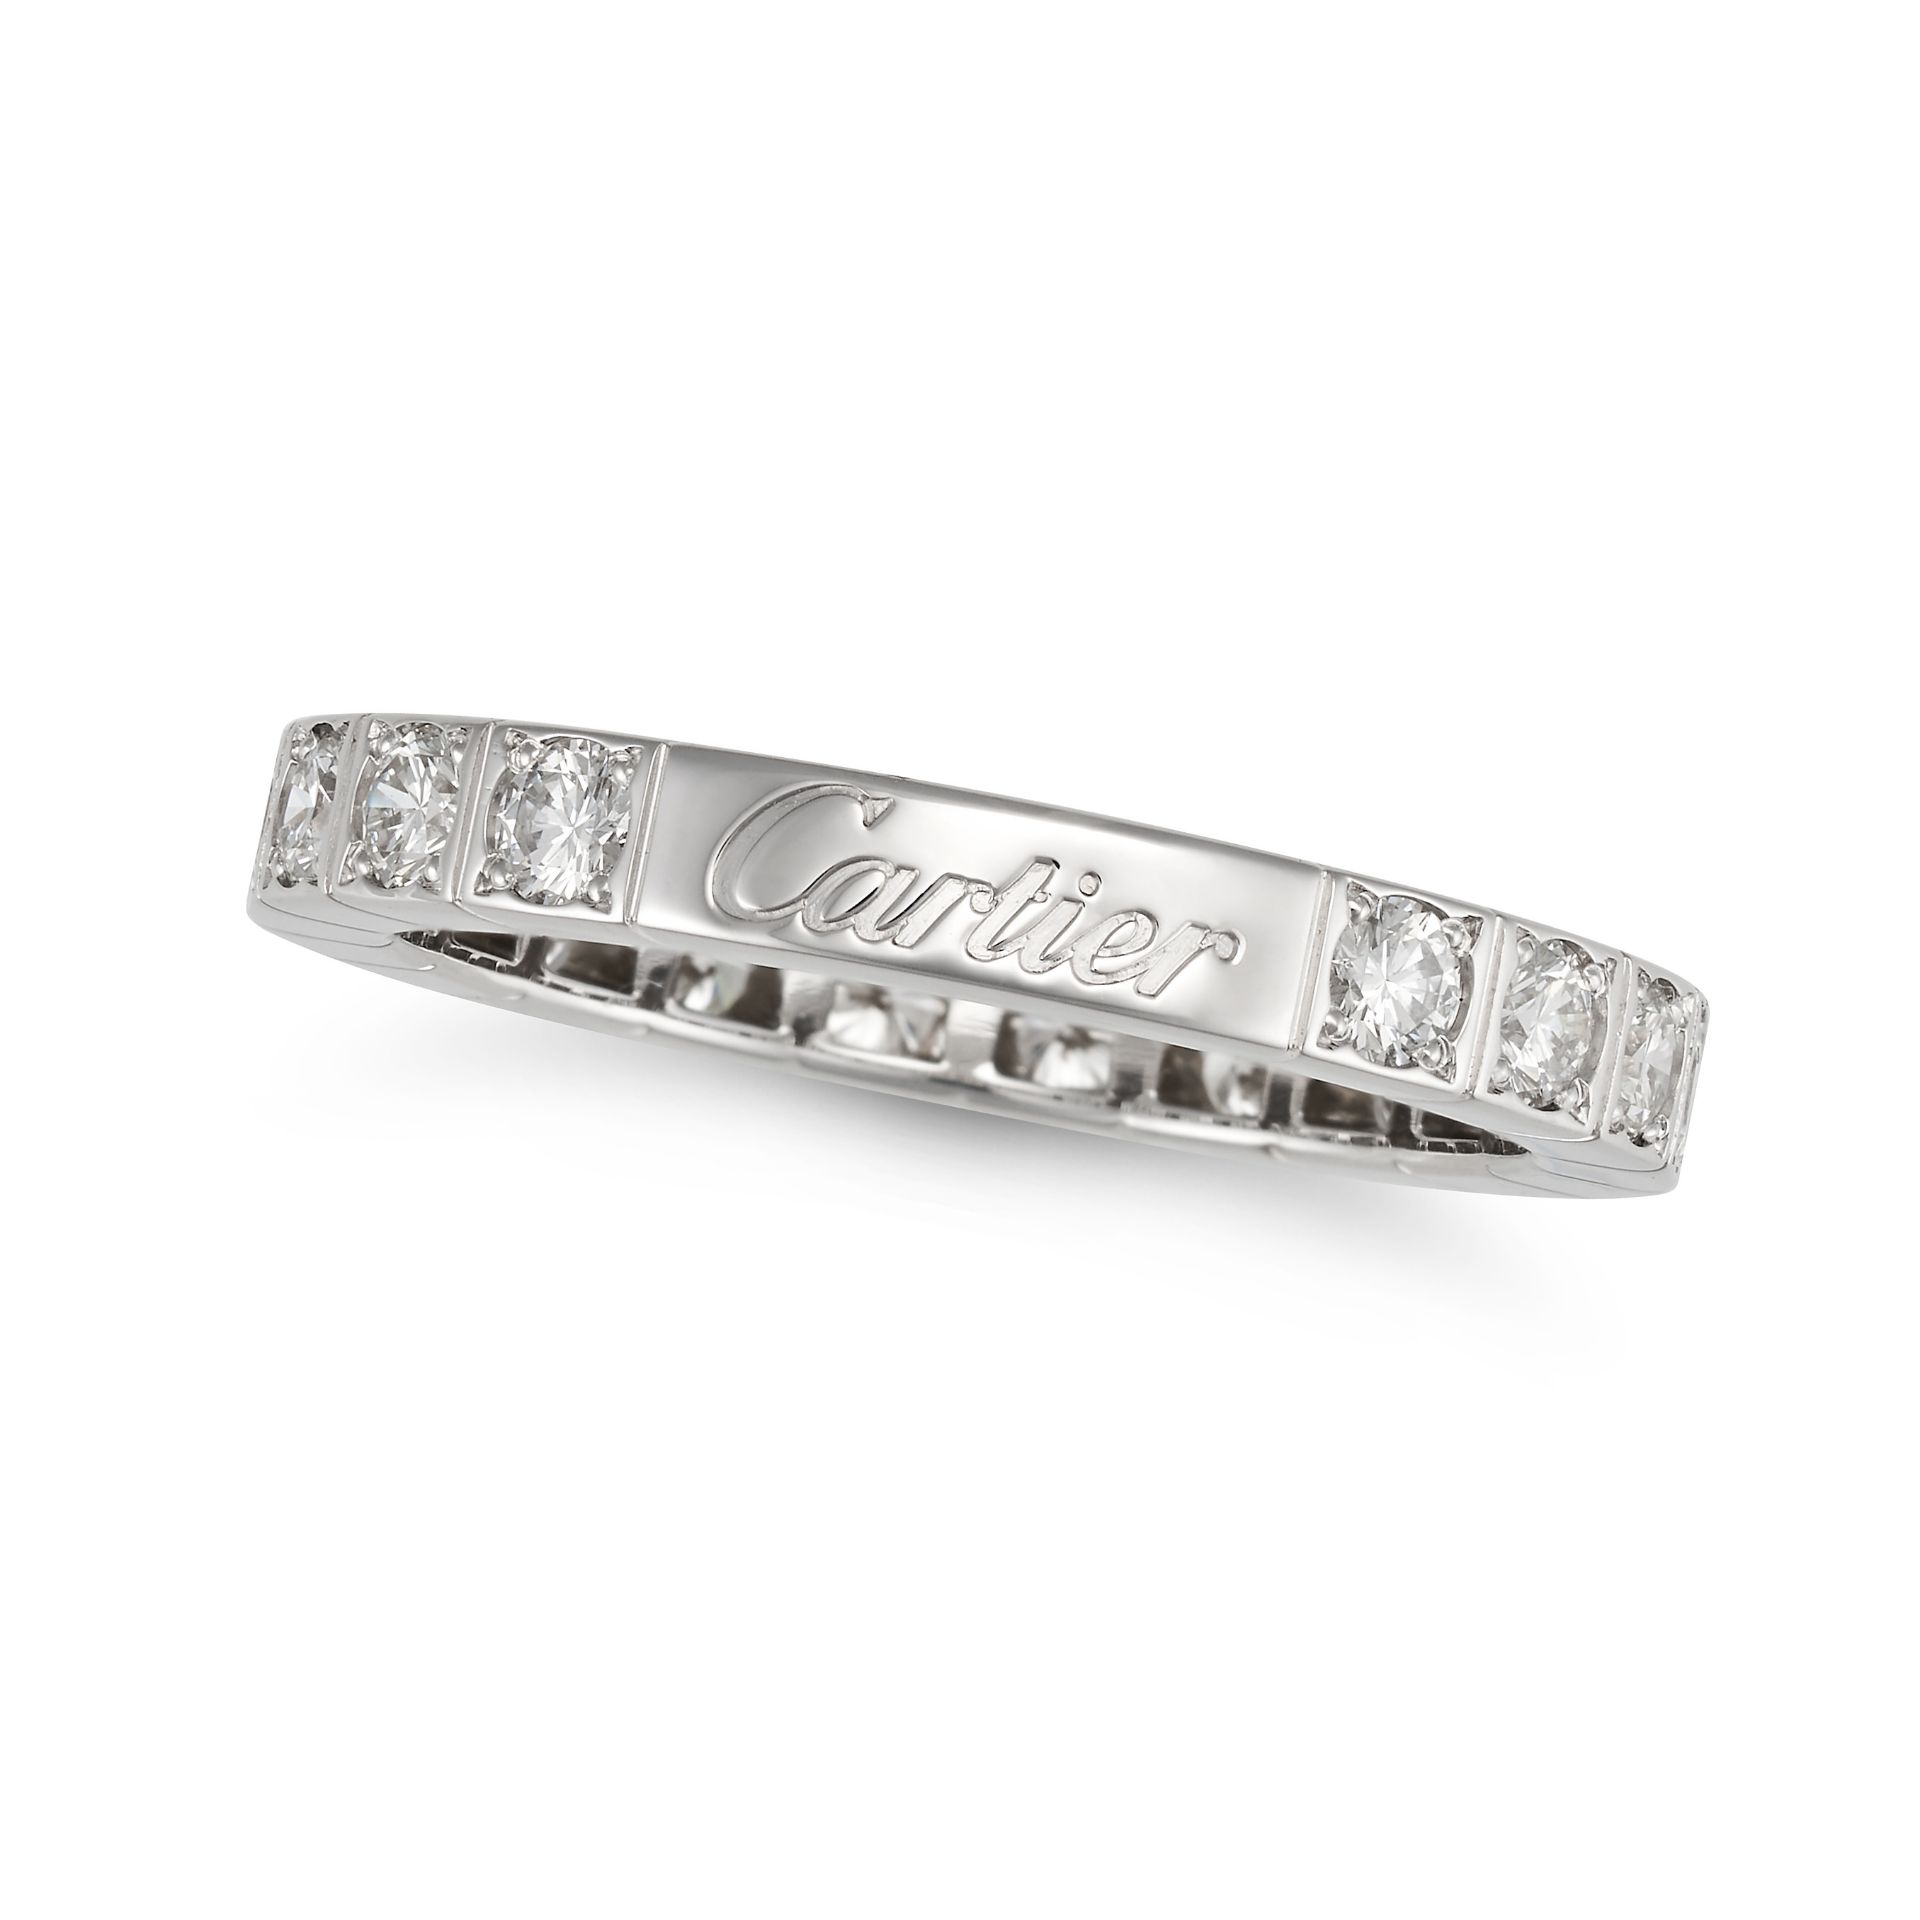 CARTIER, A DIAMOND LANIERES RING in 18ct white gold, set with a row of round brilliant cut diamon... - Image 2 of 2